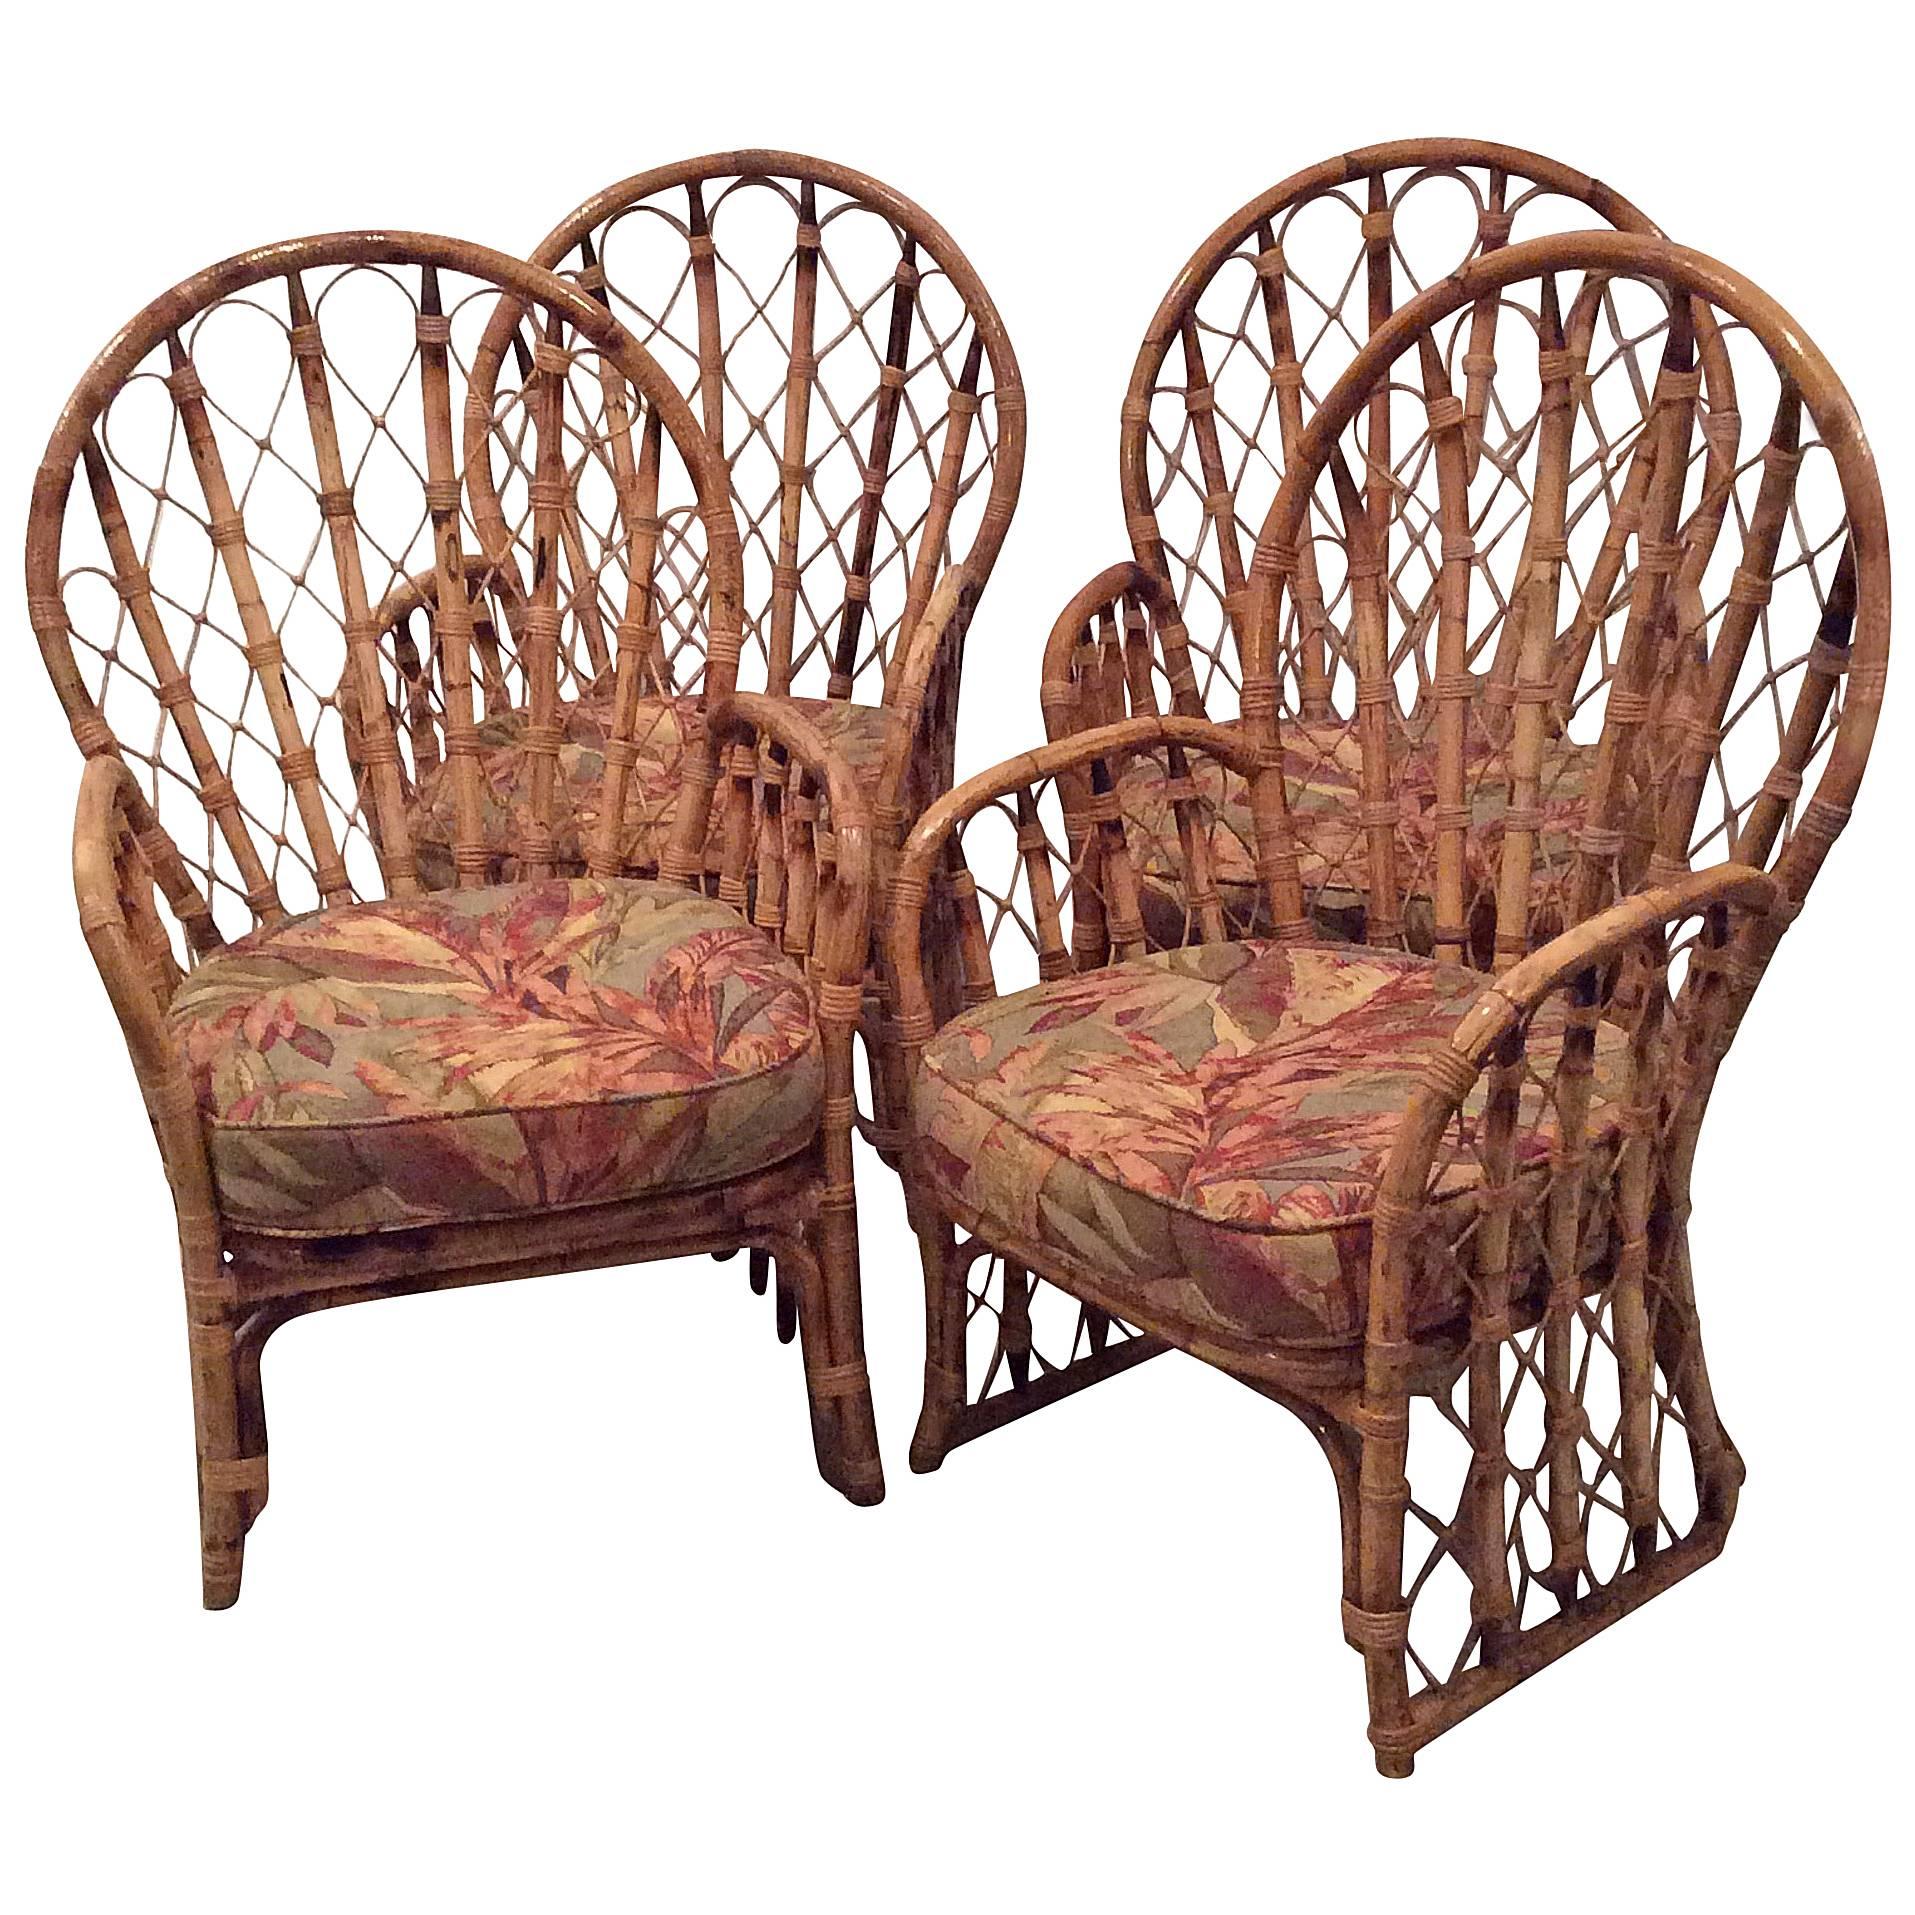 Rattan Wicker Arm Dining Chairs Vintage Set of 4 Faux Bamboo Palm Beach Patio